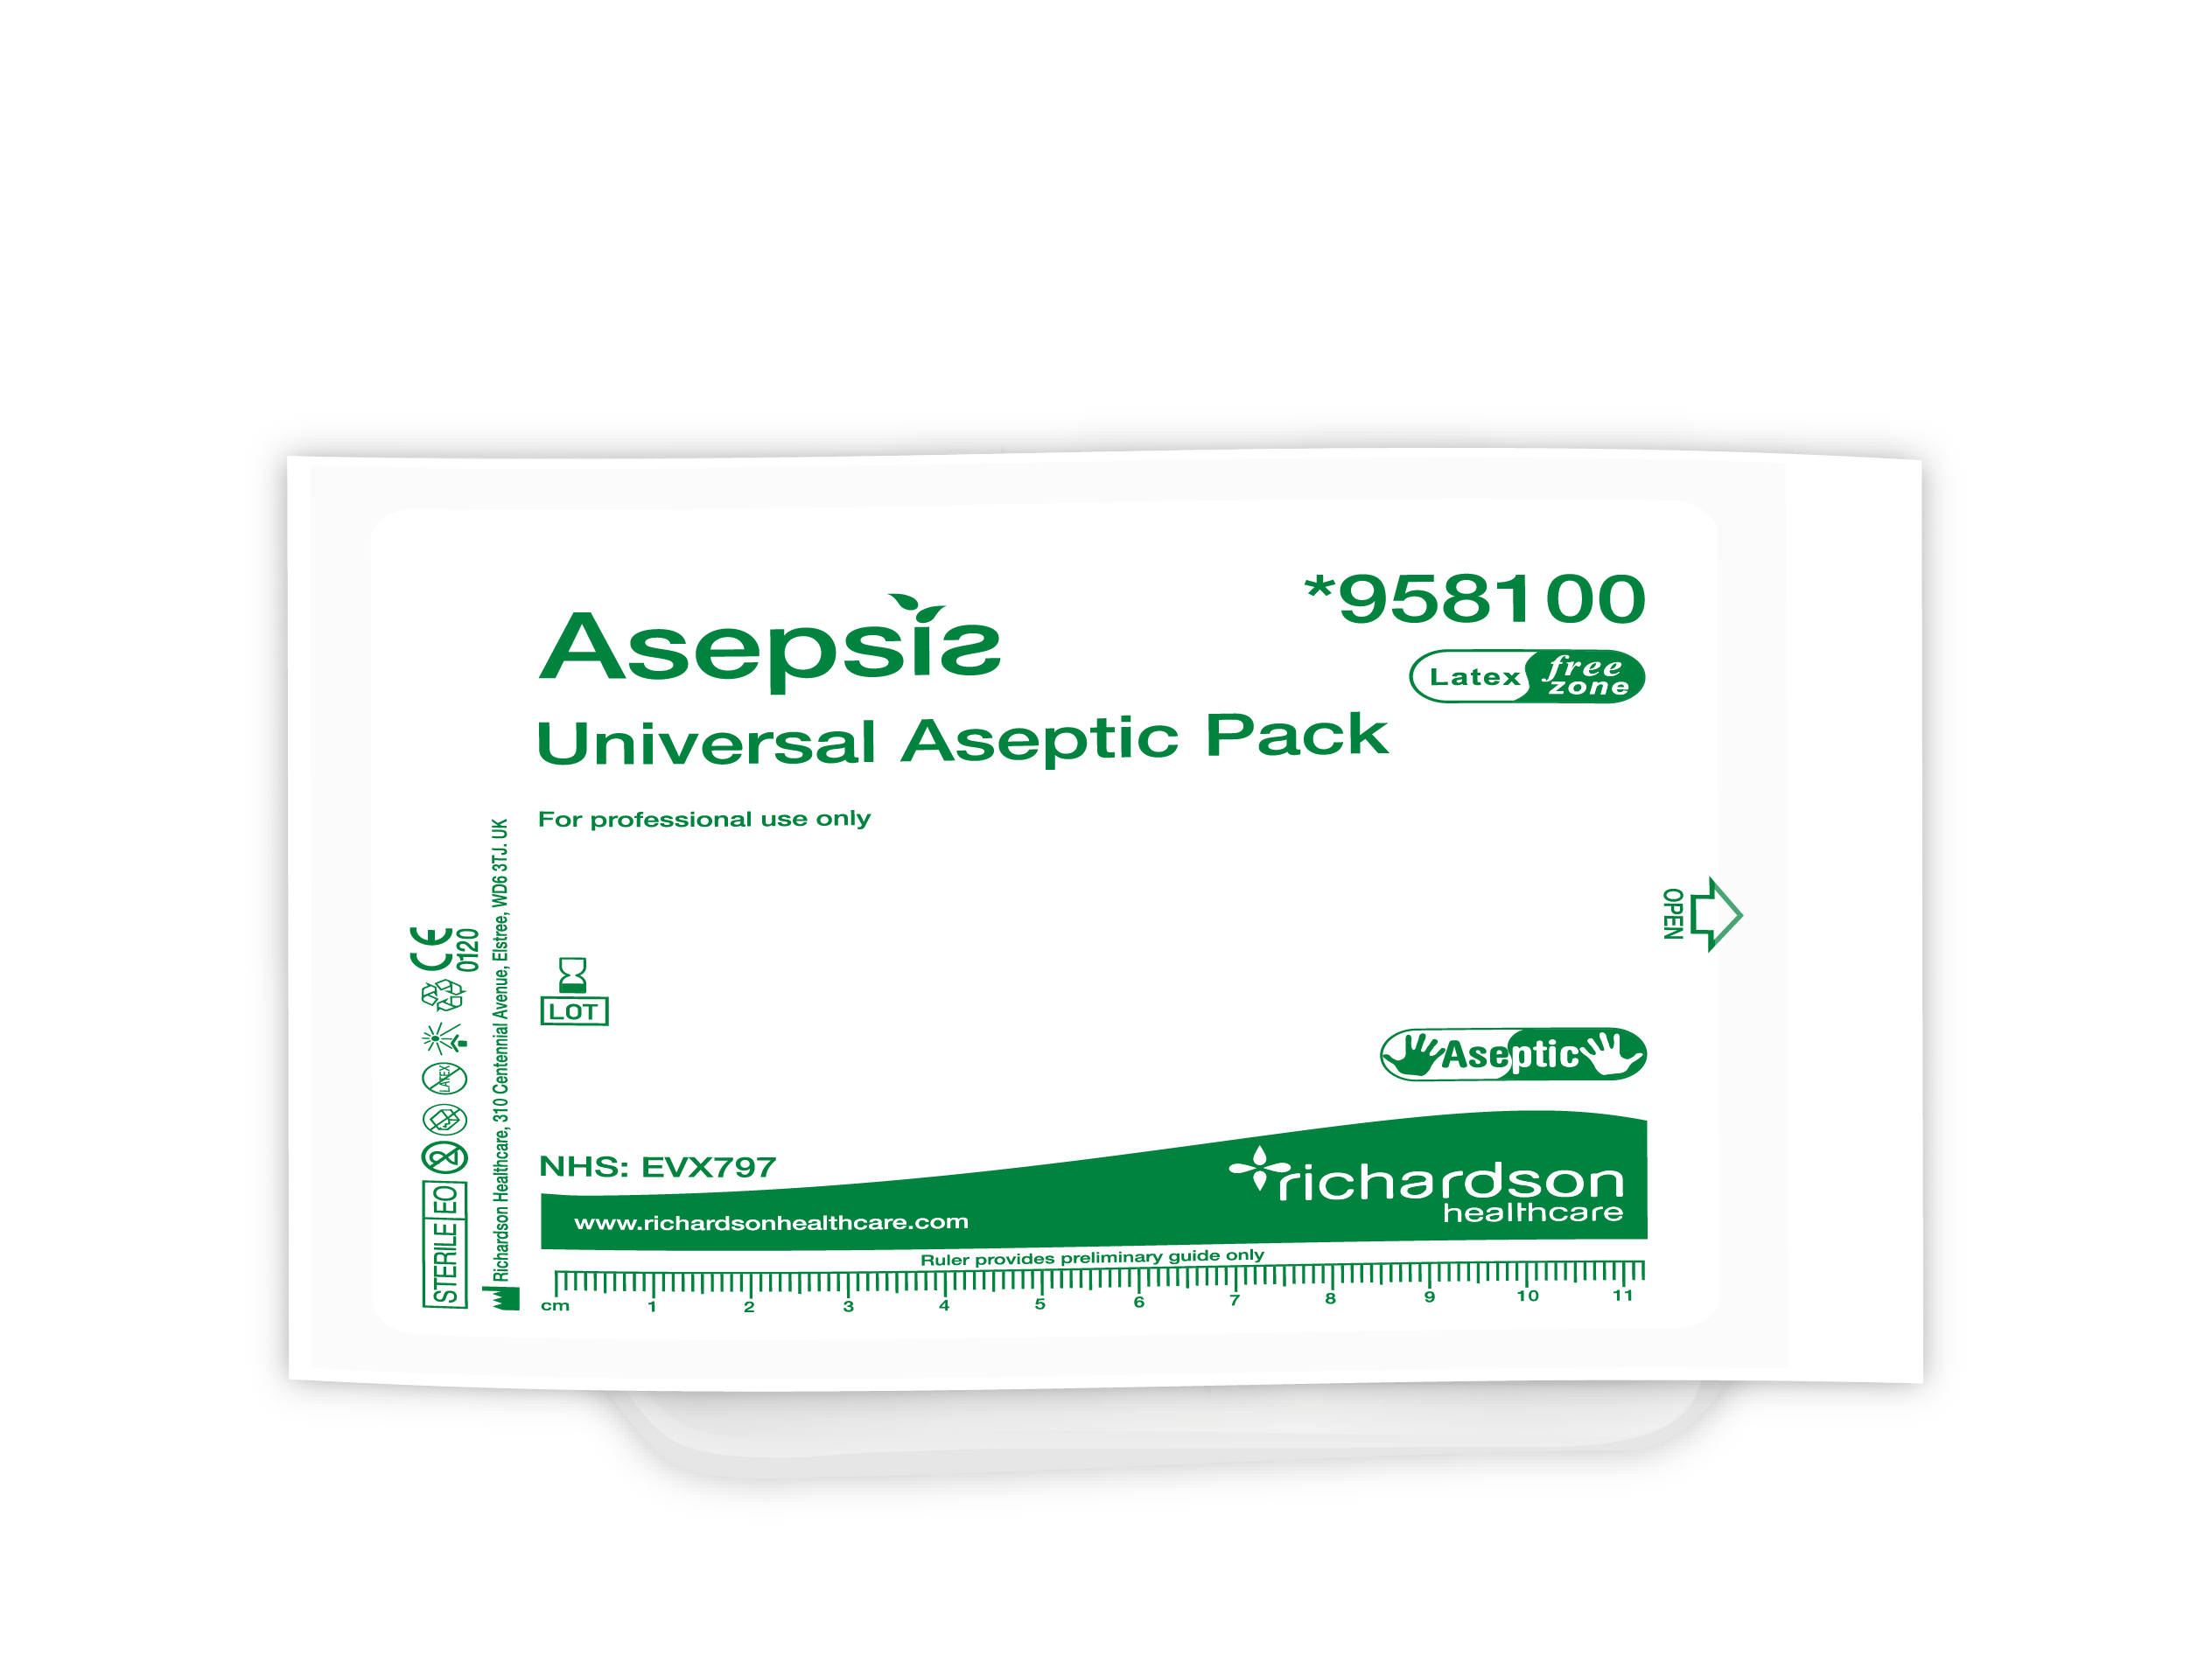 Asepsis